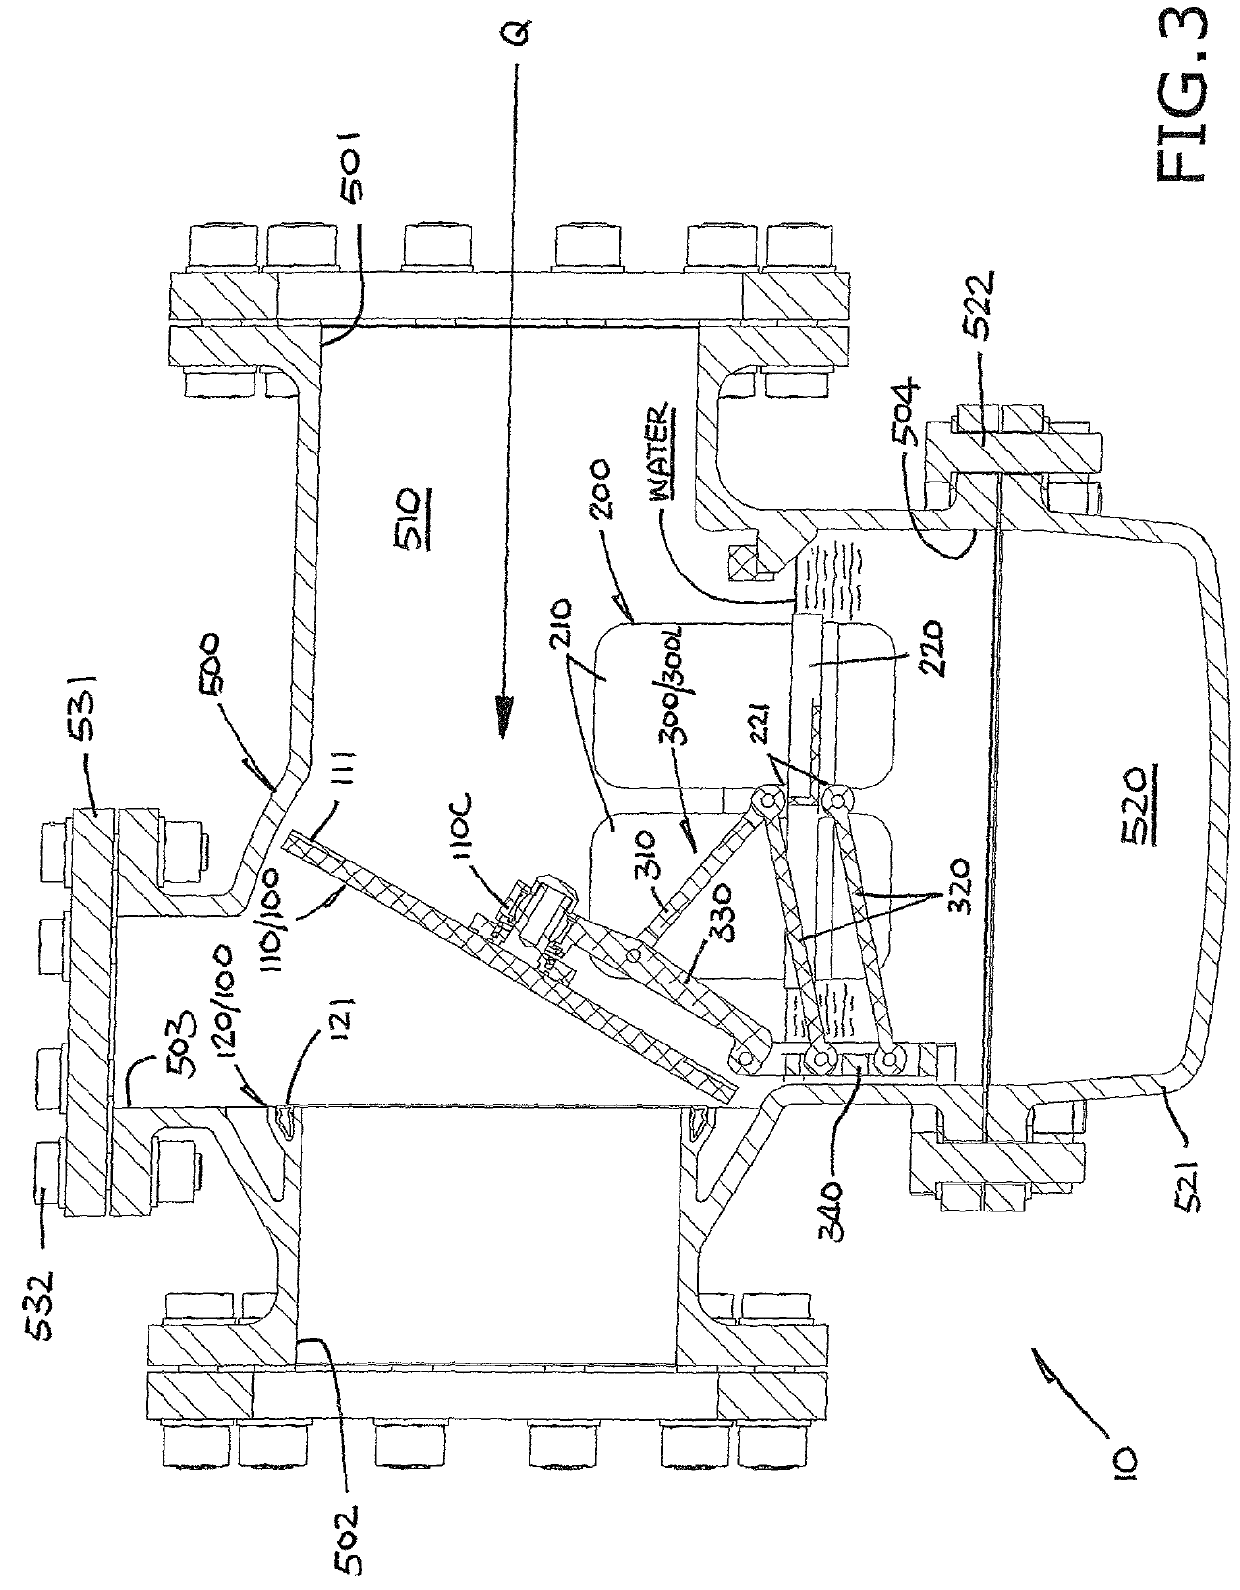 Shut-off device for pipe